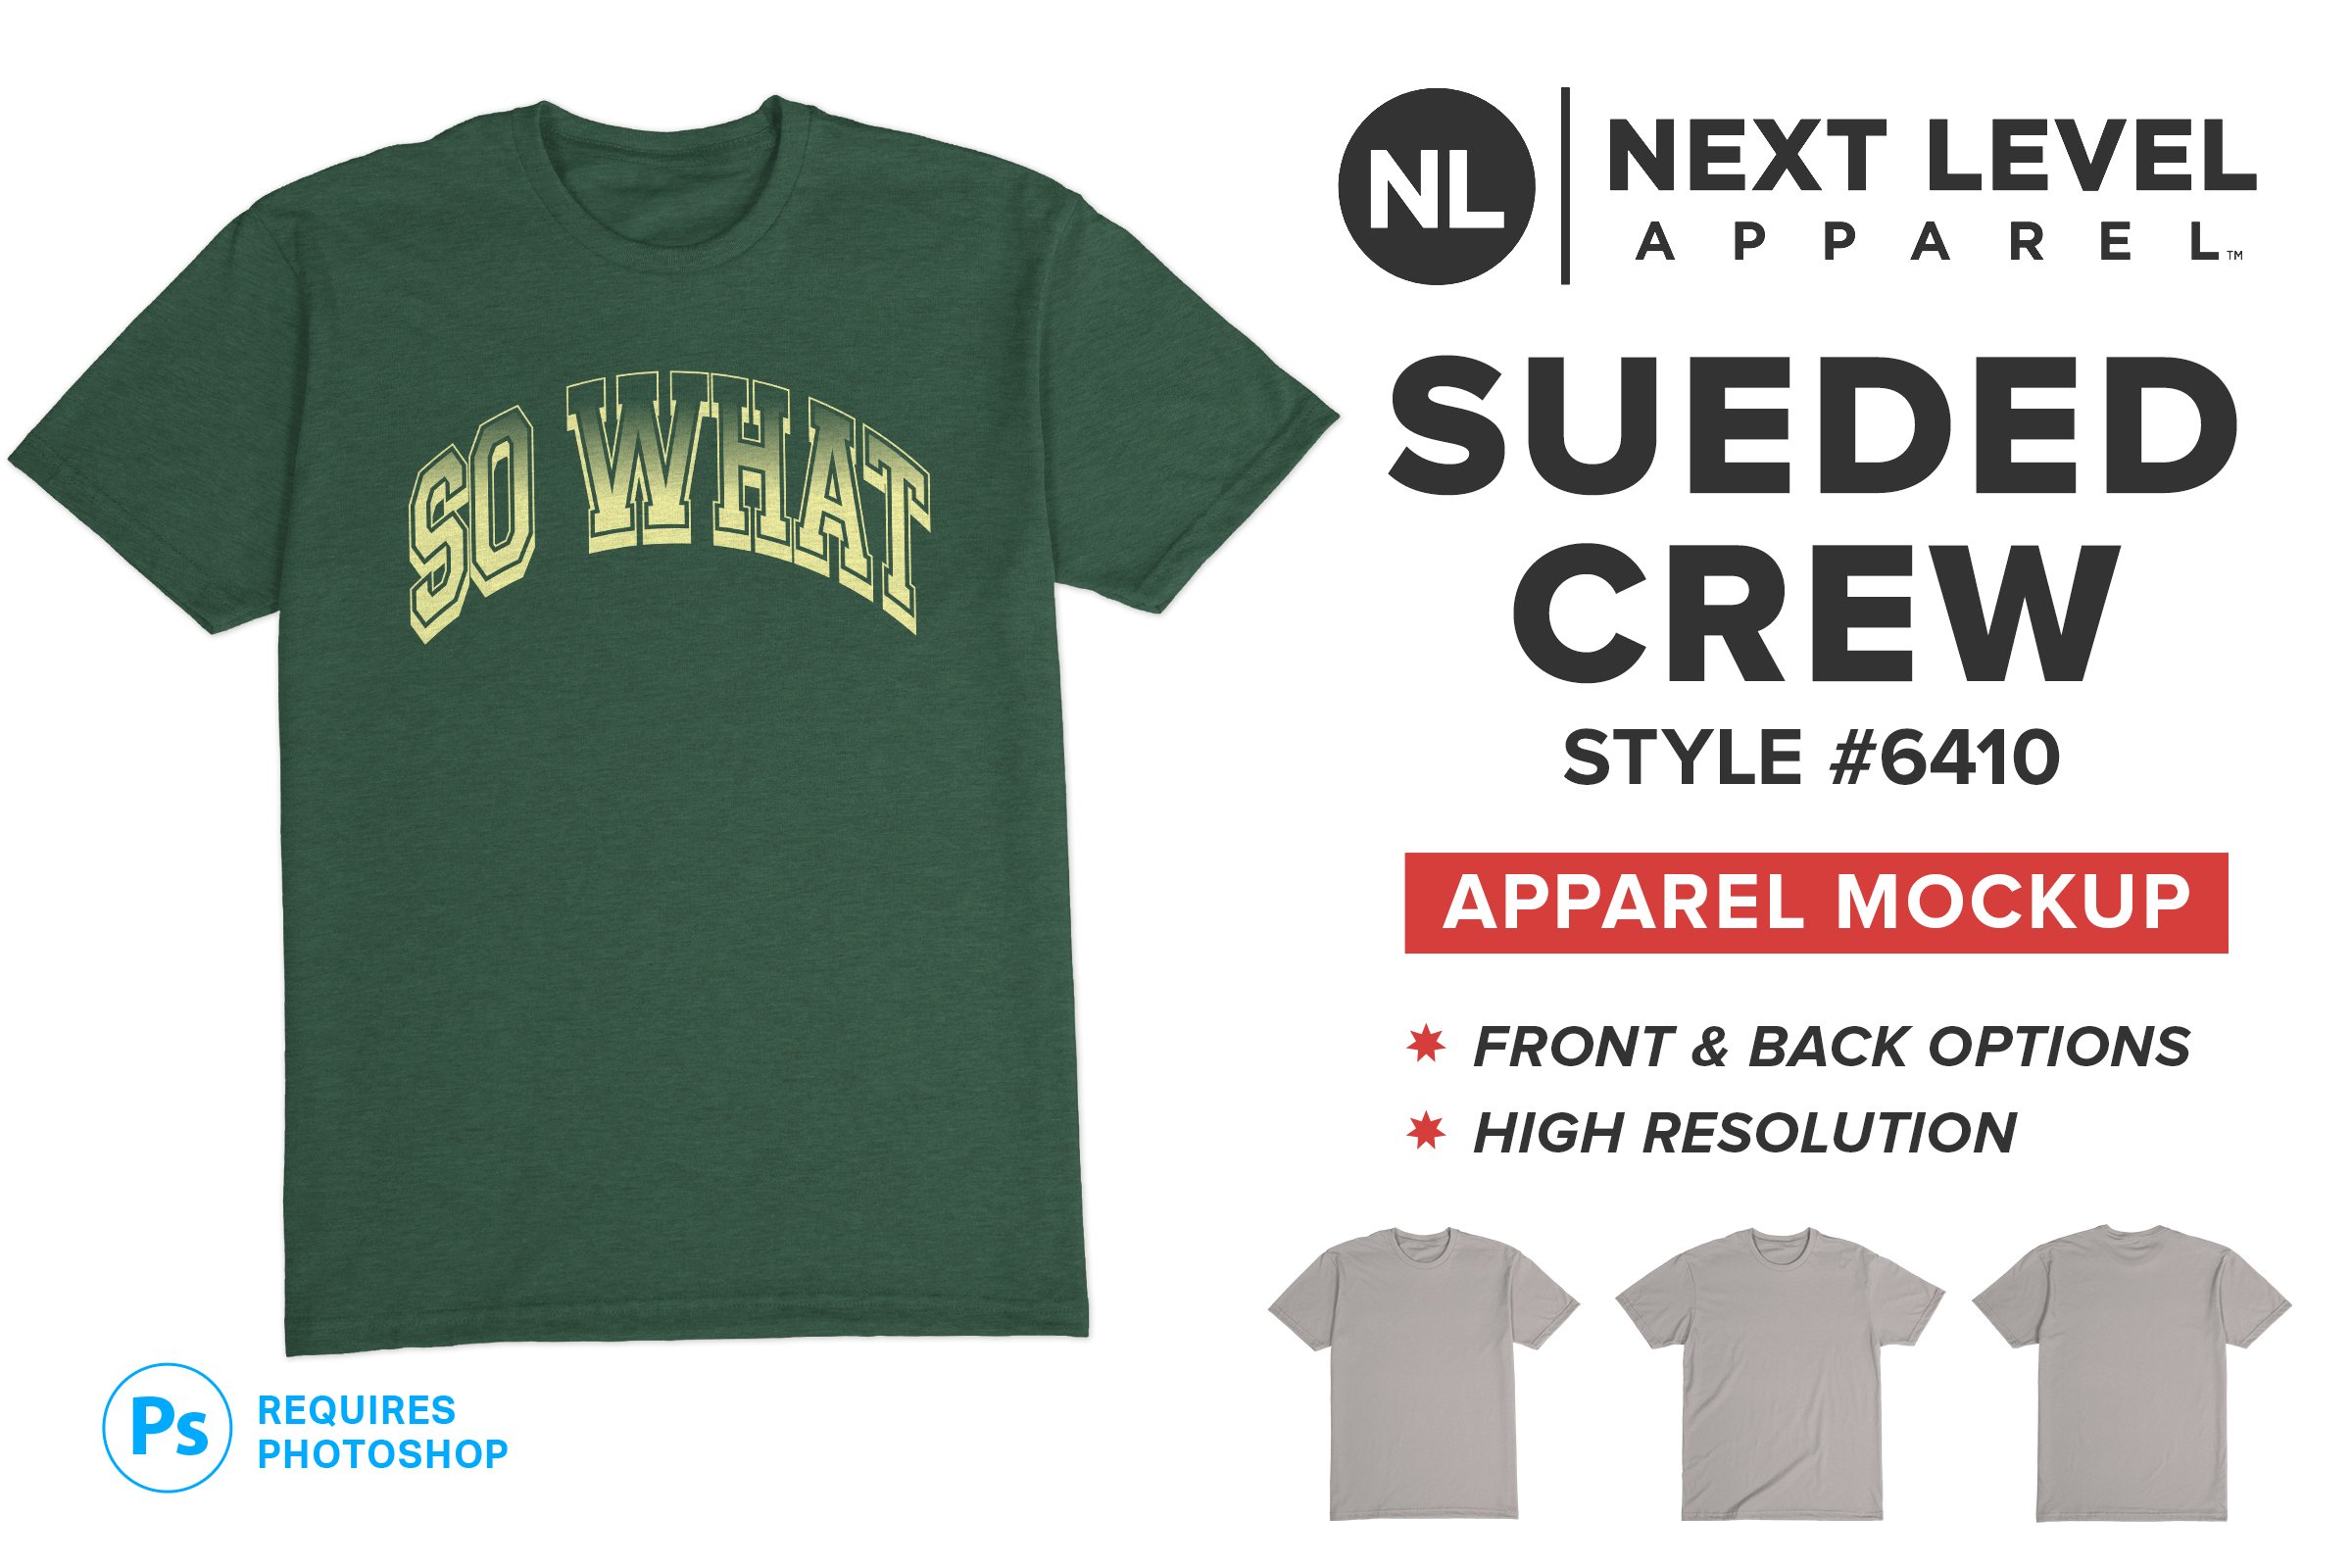 Next Level 6410 Sueded Crew Mockup cover image.